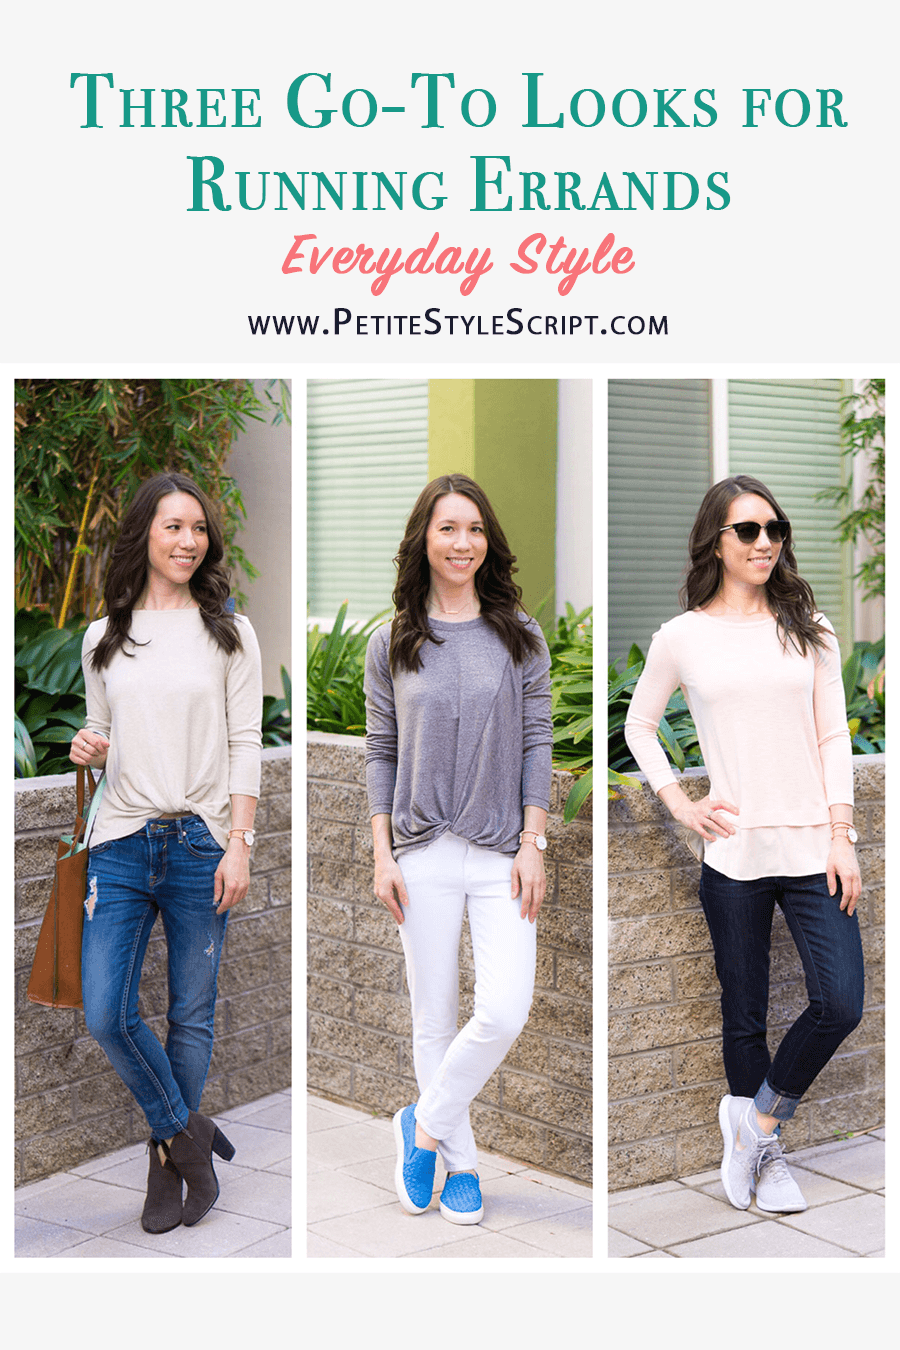 Three Go-To Looks for Running Errands 